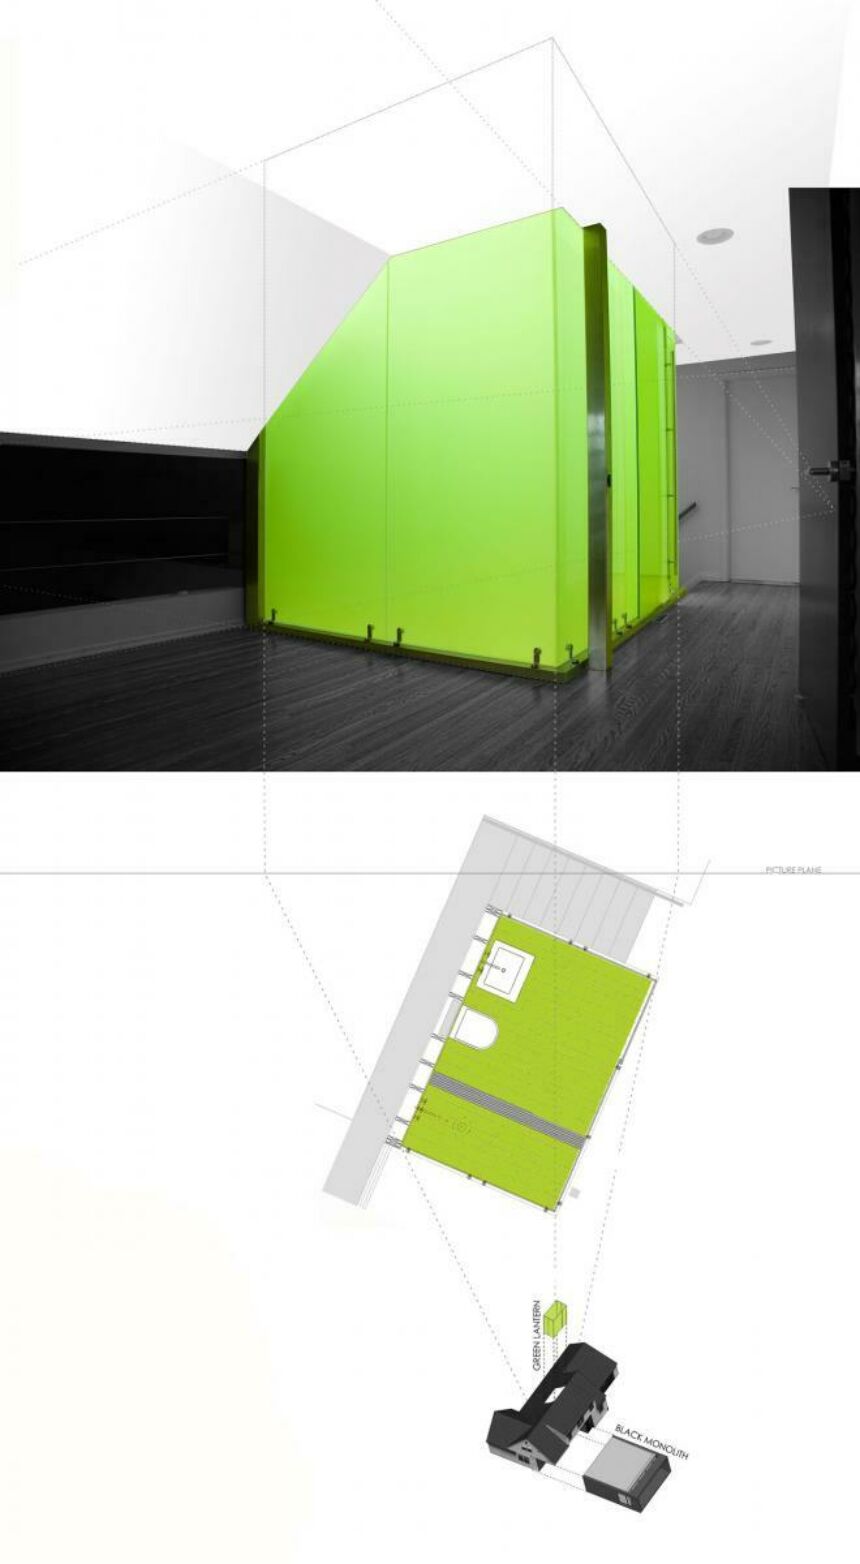 Computer-generated concept design of a floor layout, with a neon green partition in a black and white room.